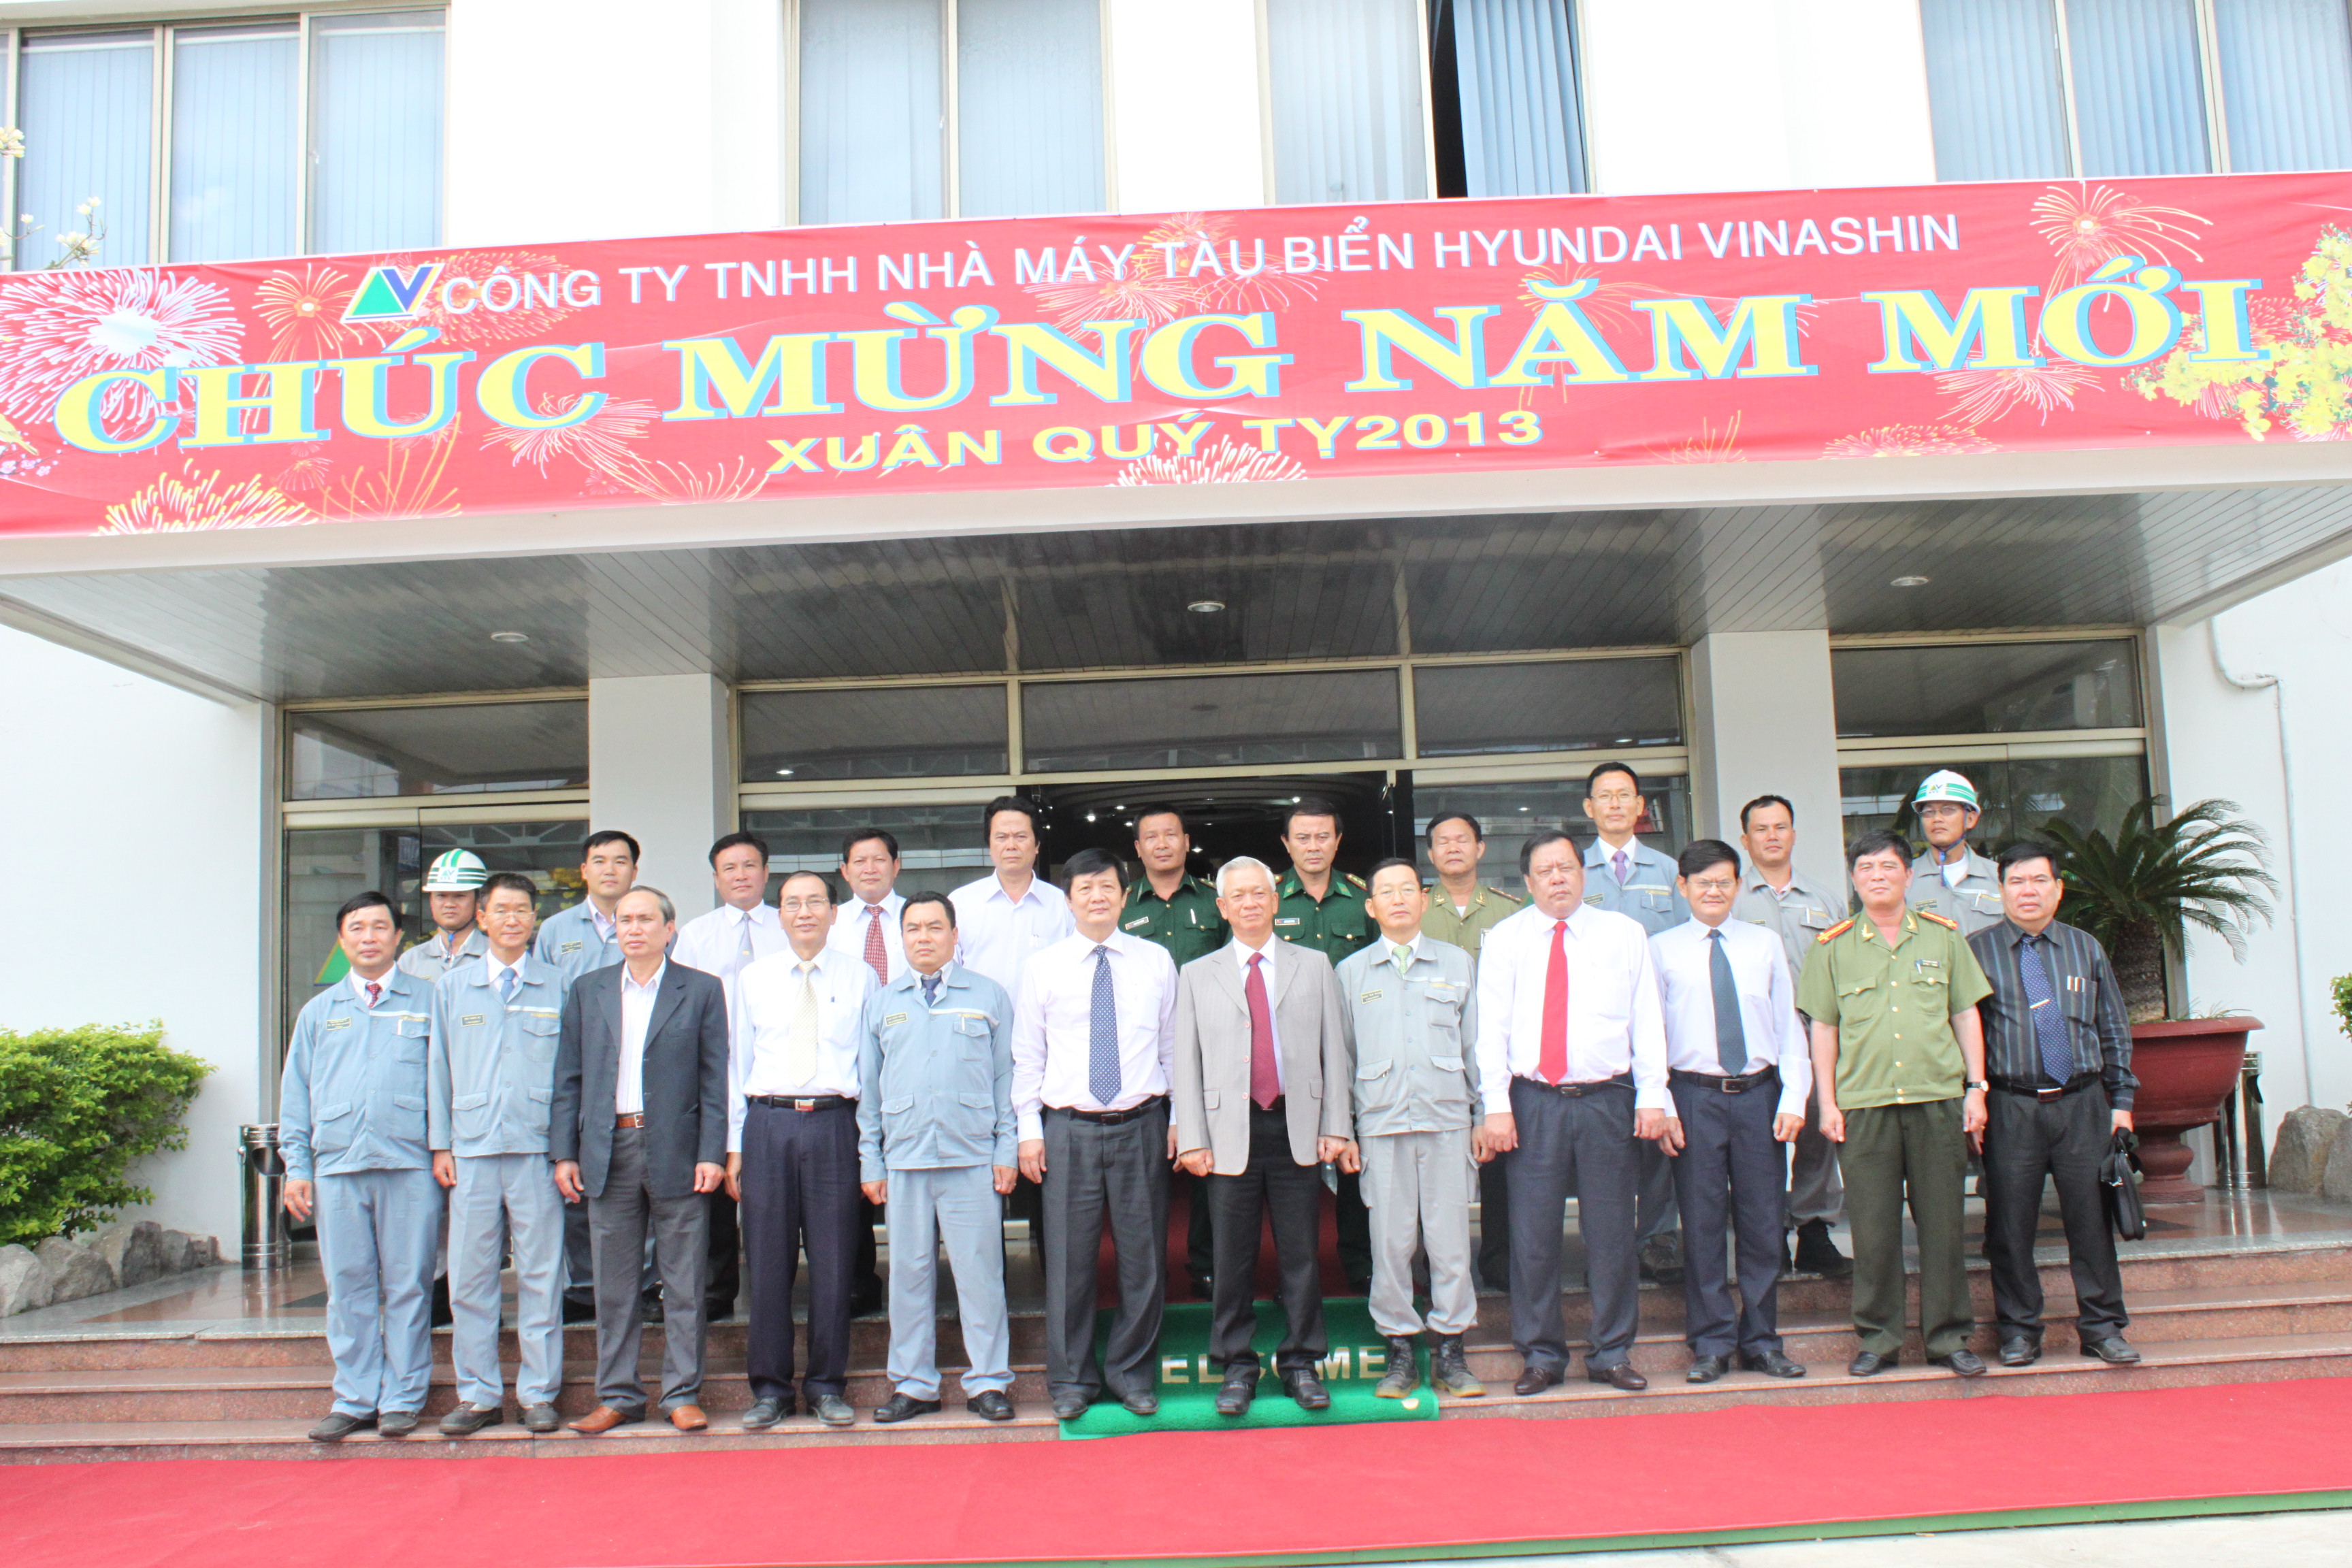 Mr. Thang ang HVS Leaders took commemorative photo